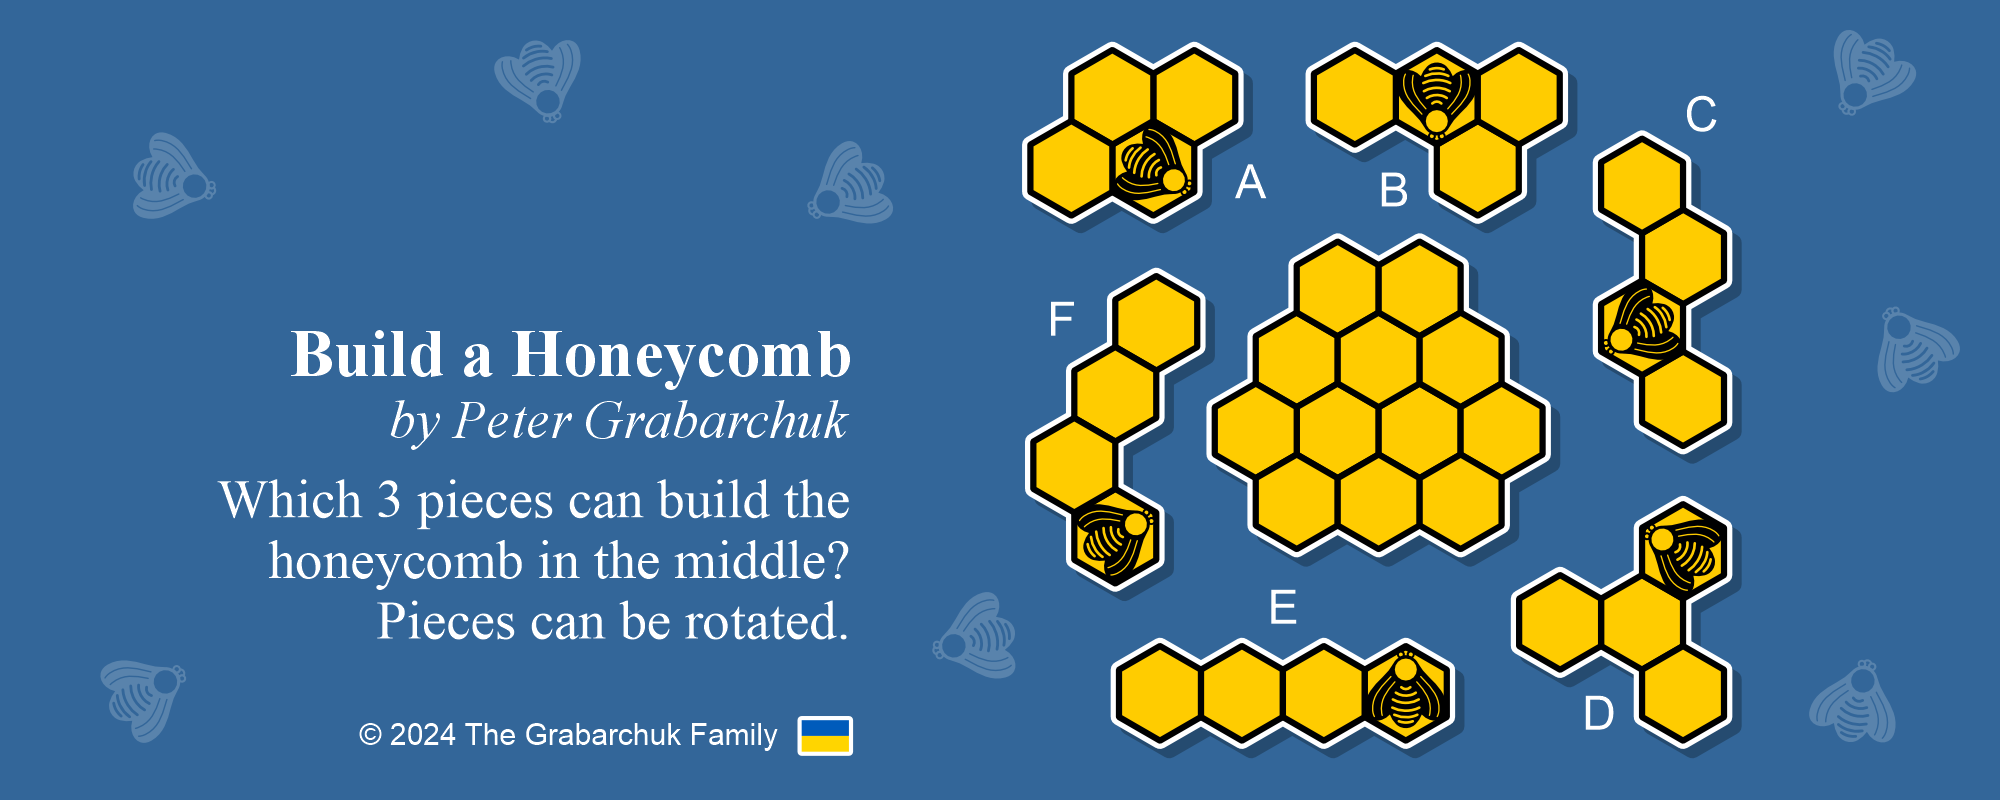 Build A Honeycomb by Peter Grabarchuk